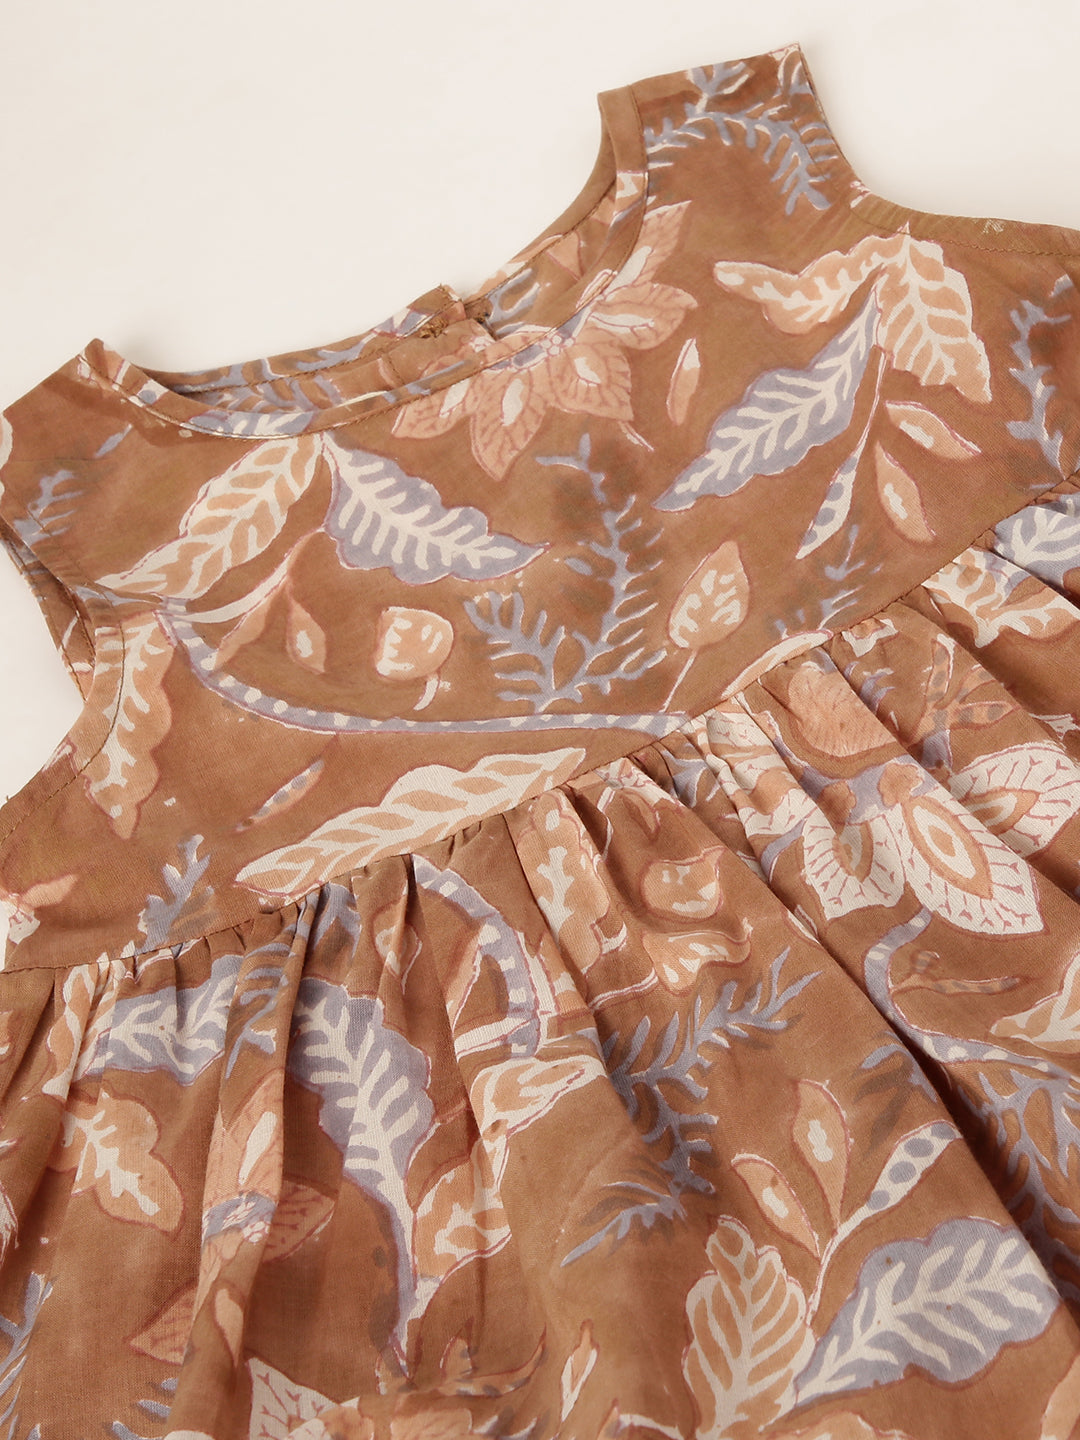 Girls sleeveless dress with Brown and lavender block print. Ages 1-8 years - Close-up